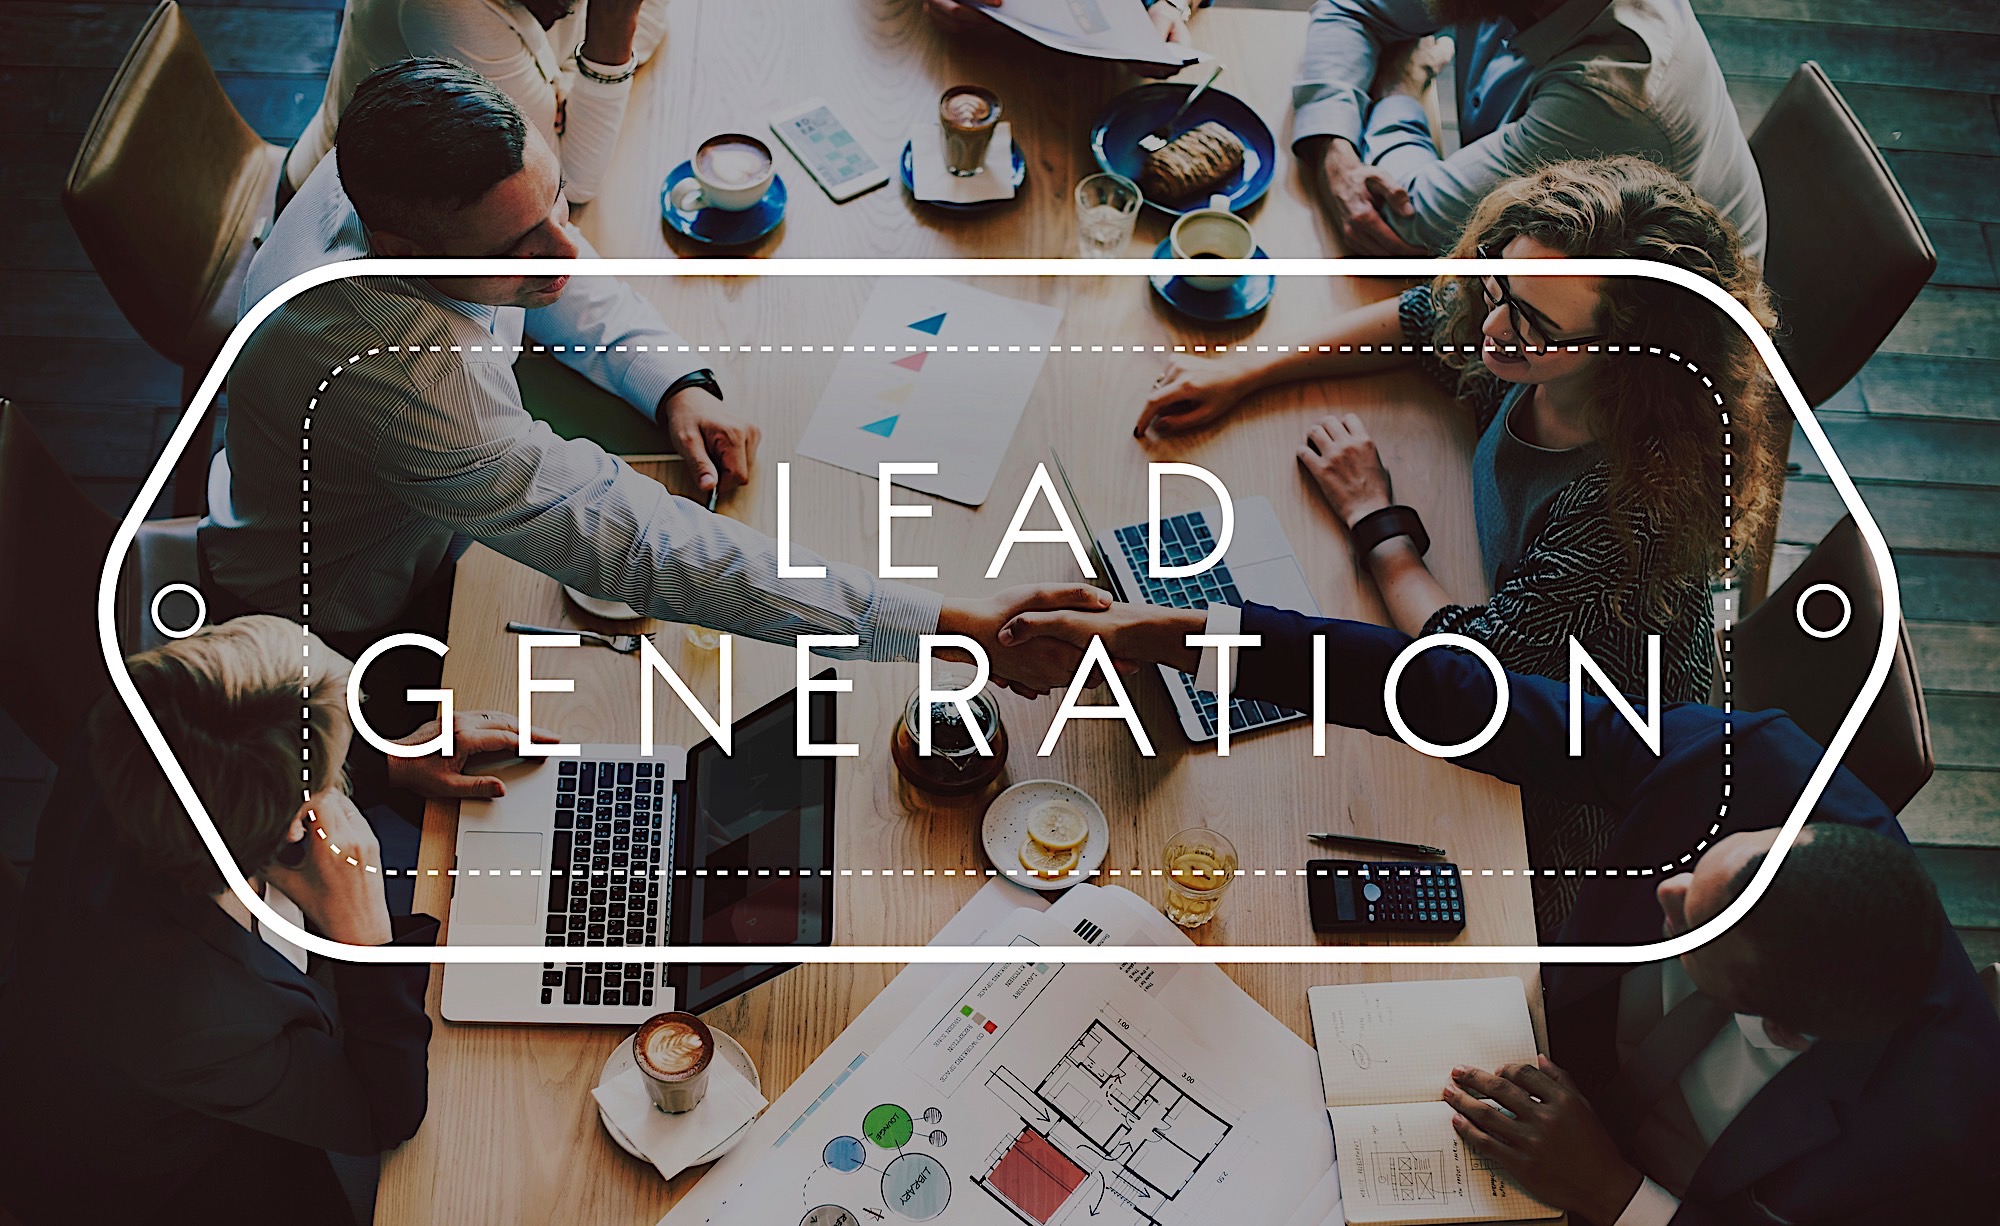 How to generate real estate leads